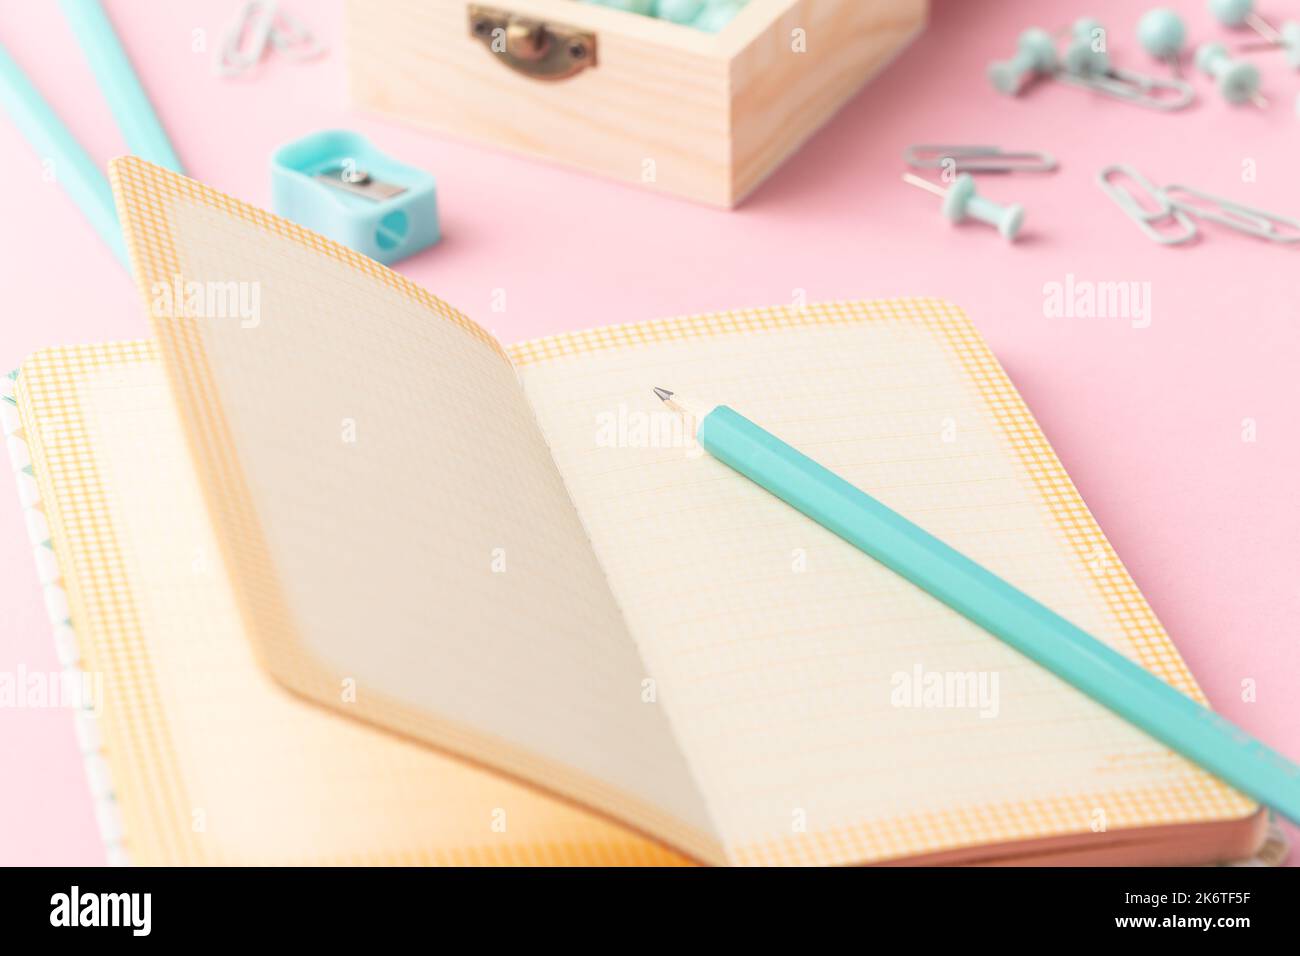 School stationery in turquoise color, flat lay. Back to school Stock Photo